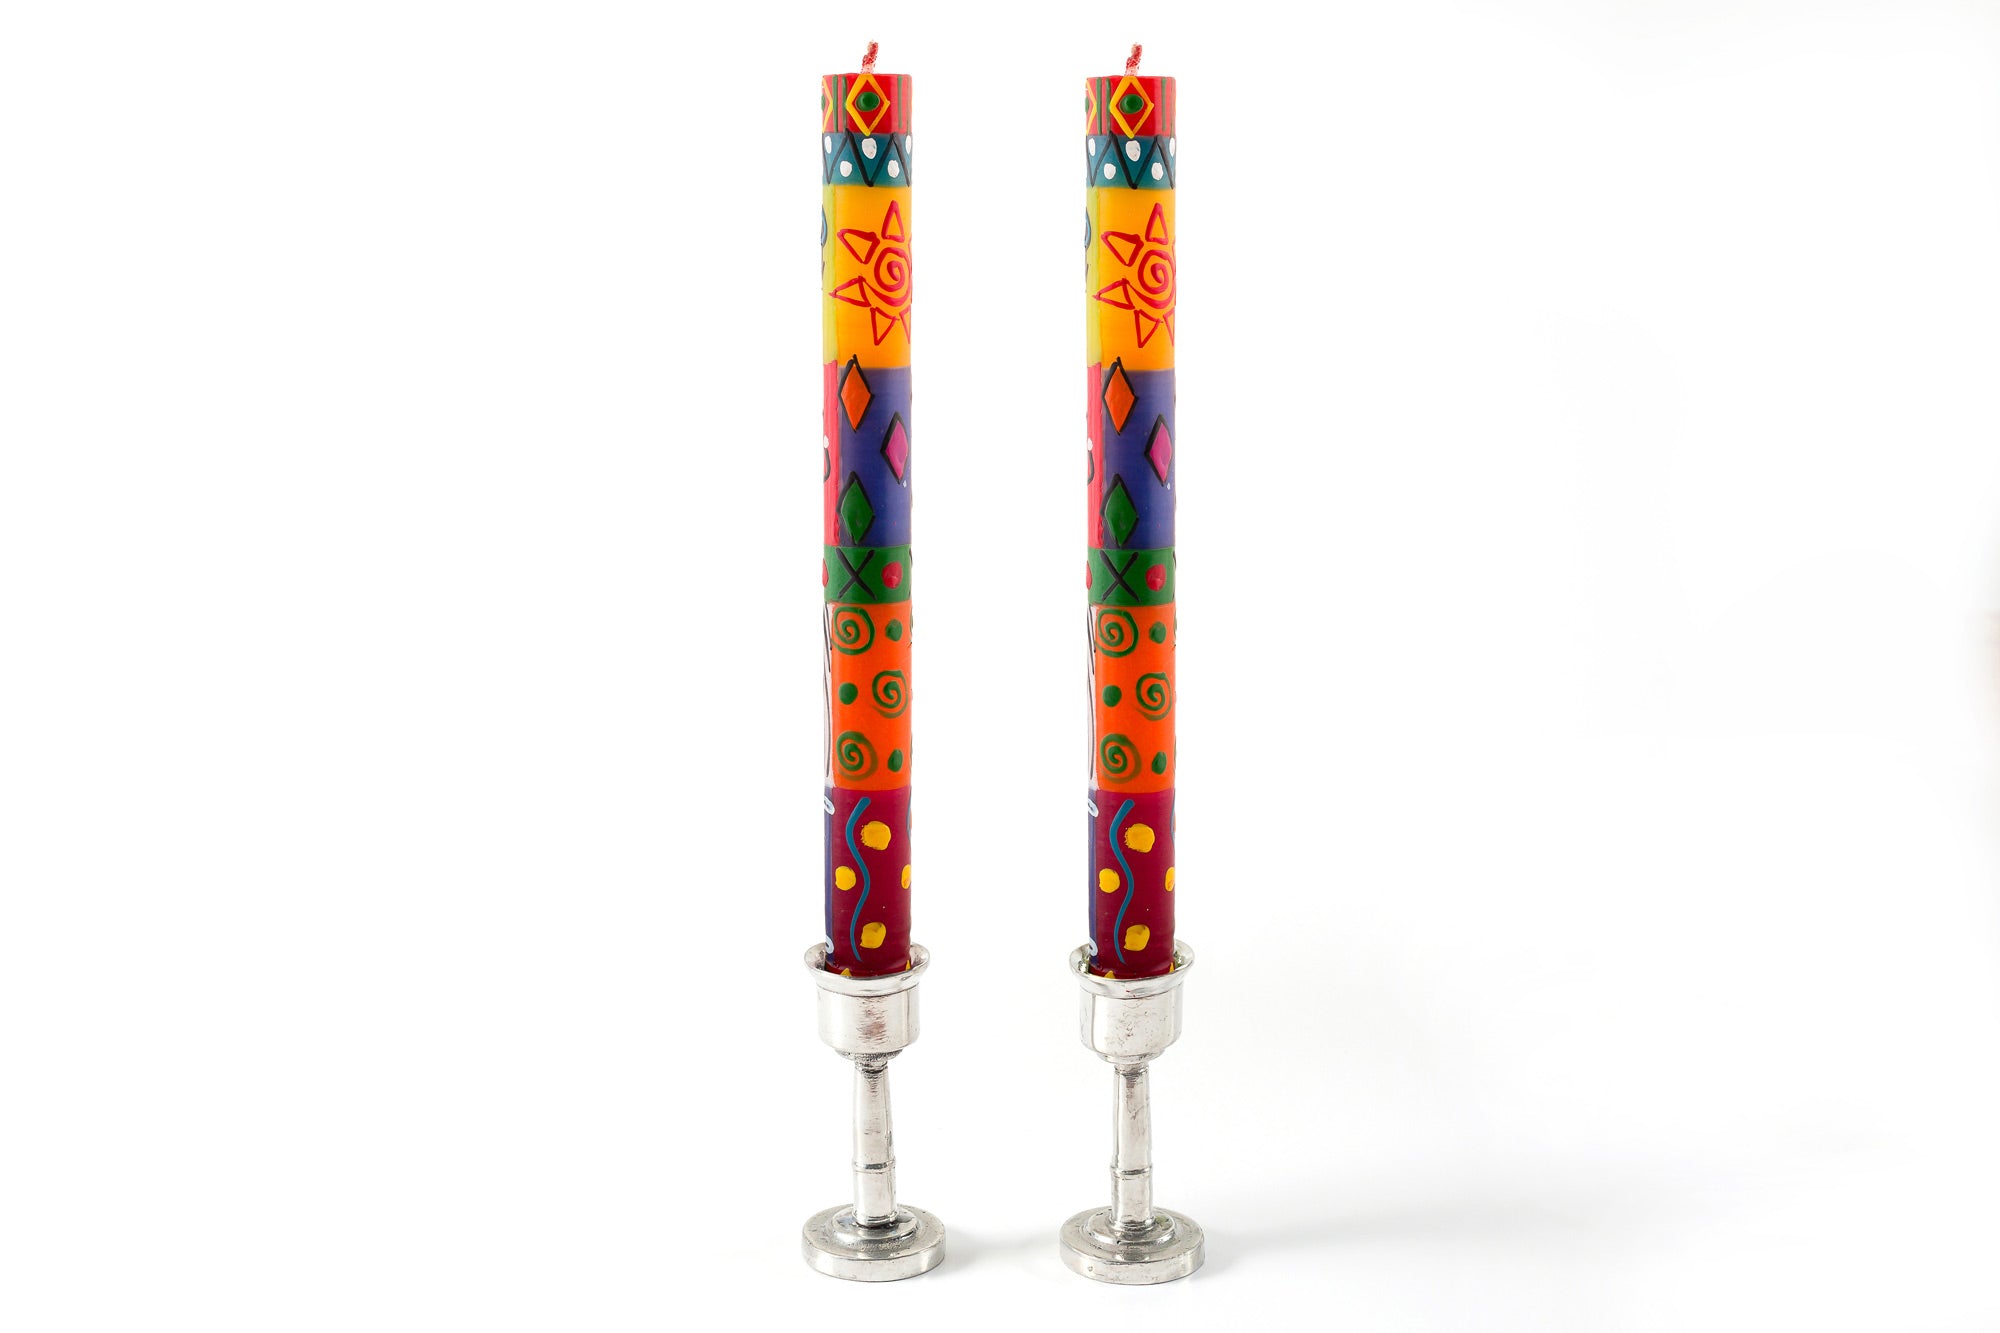 Matched pair of Muticolor Ethnic tapers in pewter candle holders. Bright, colorful, sunshine and fun designs that sing out Africa!